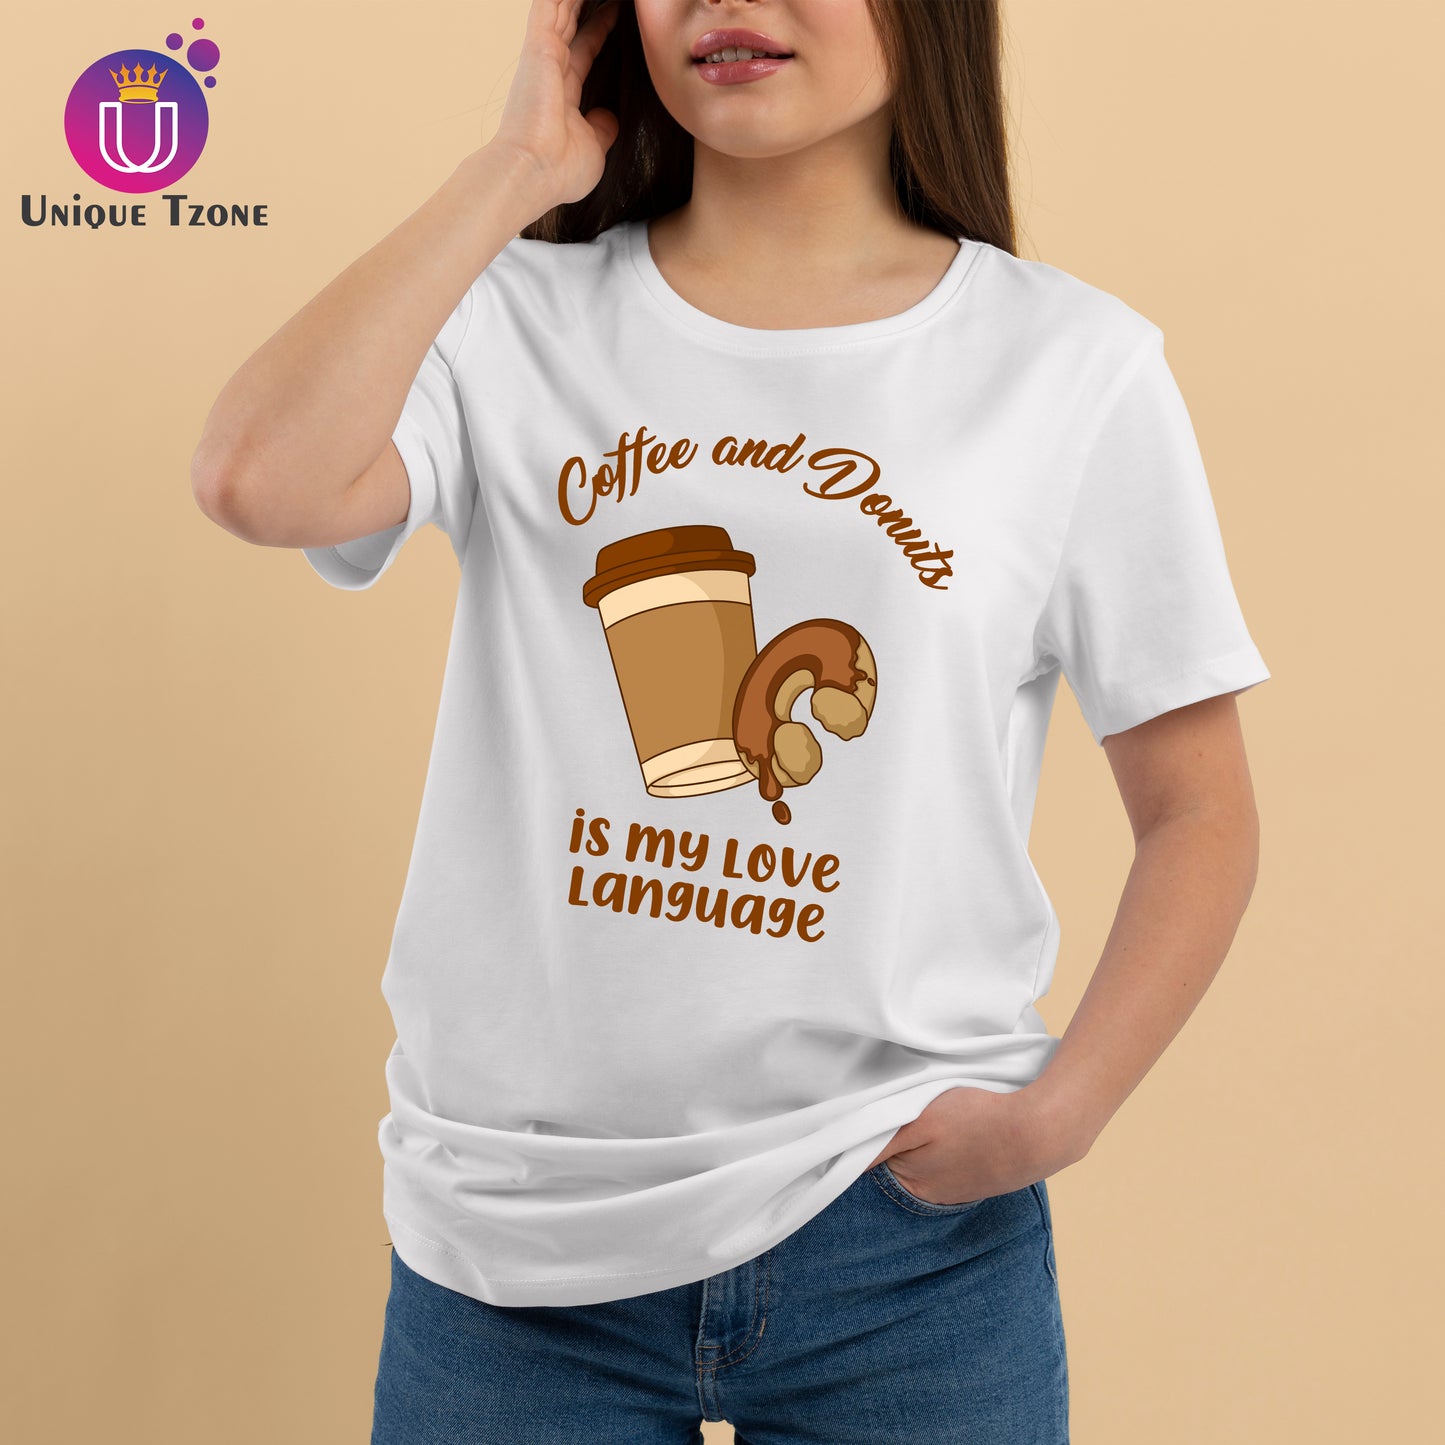 Coffee And Donuts Is My Love Language White Half Sleeve Cotton T-shirt